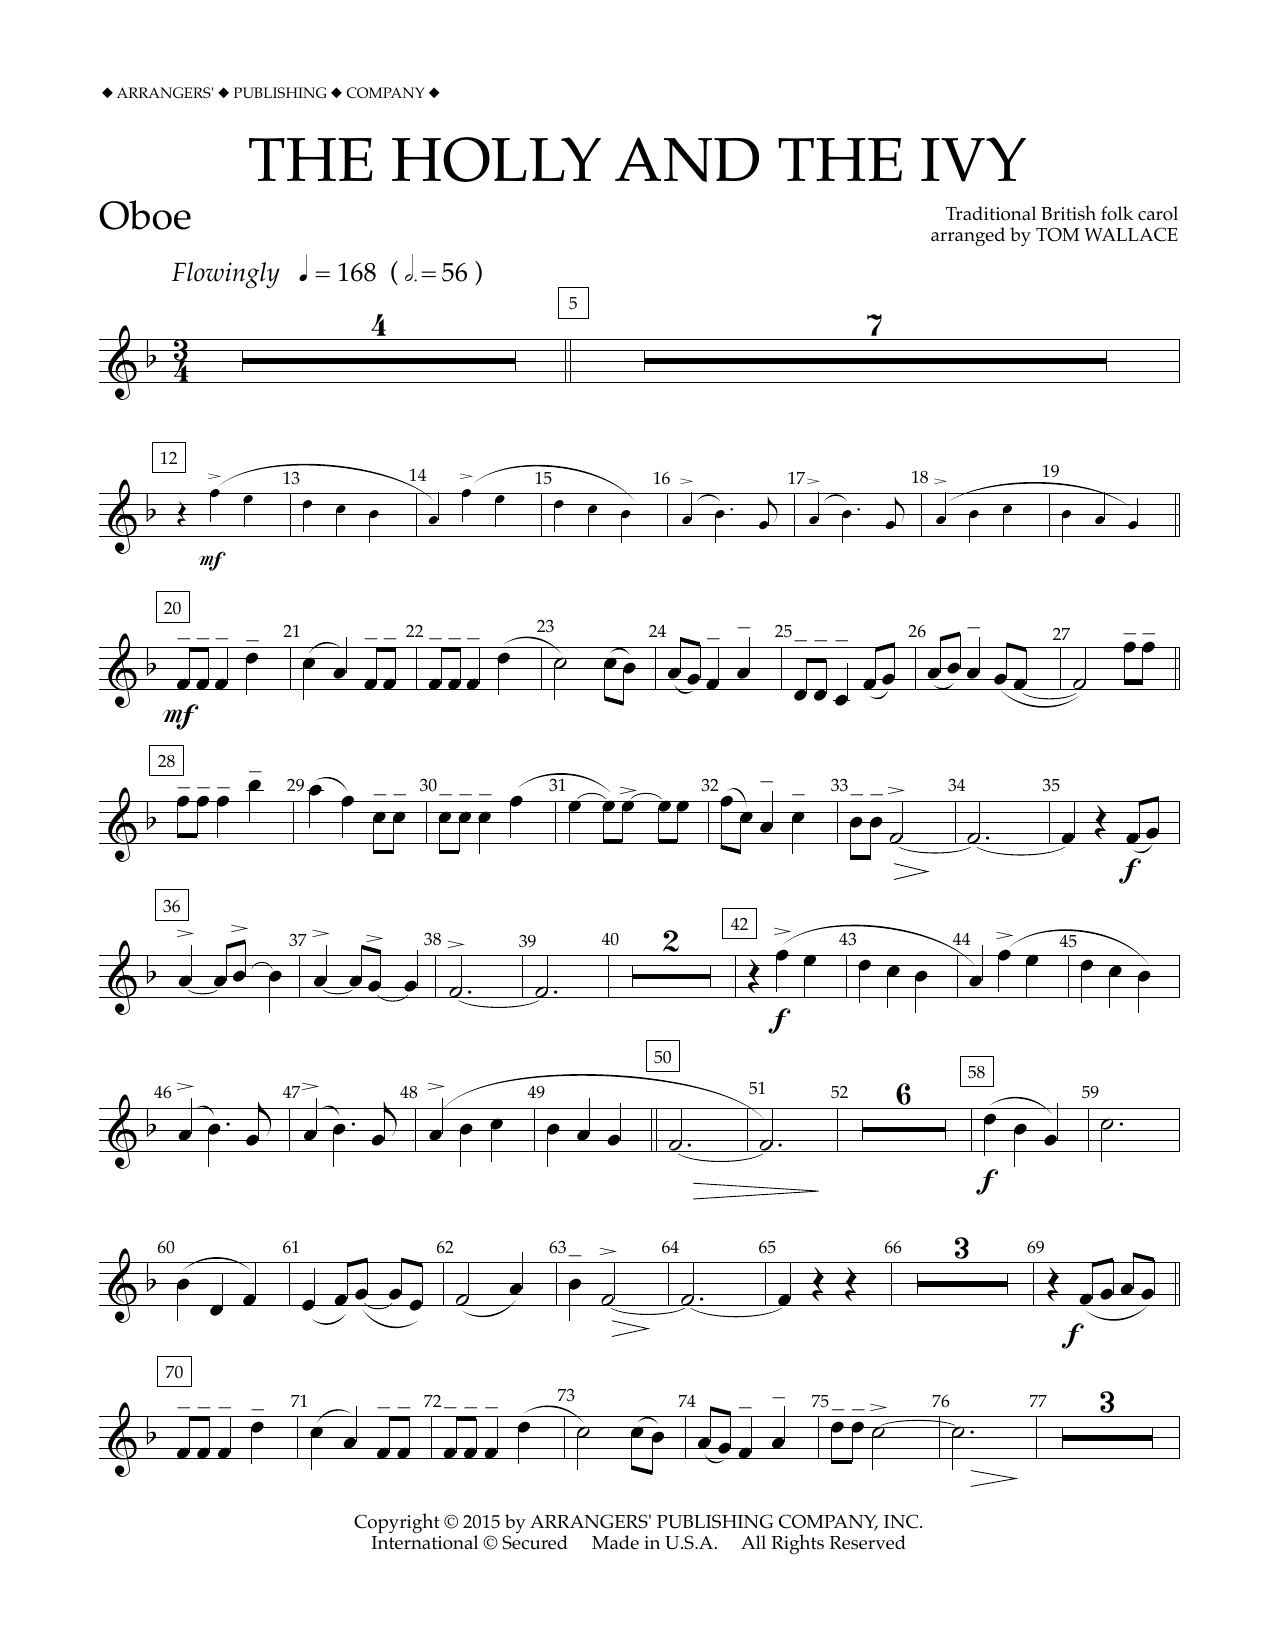 Download Tom Wallace The Holly and the Ivy - Oboe Sheet Music